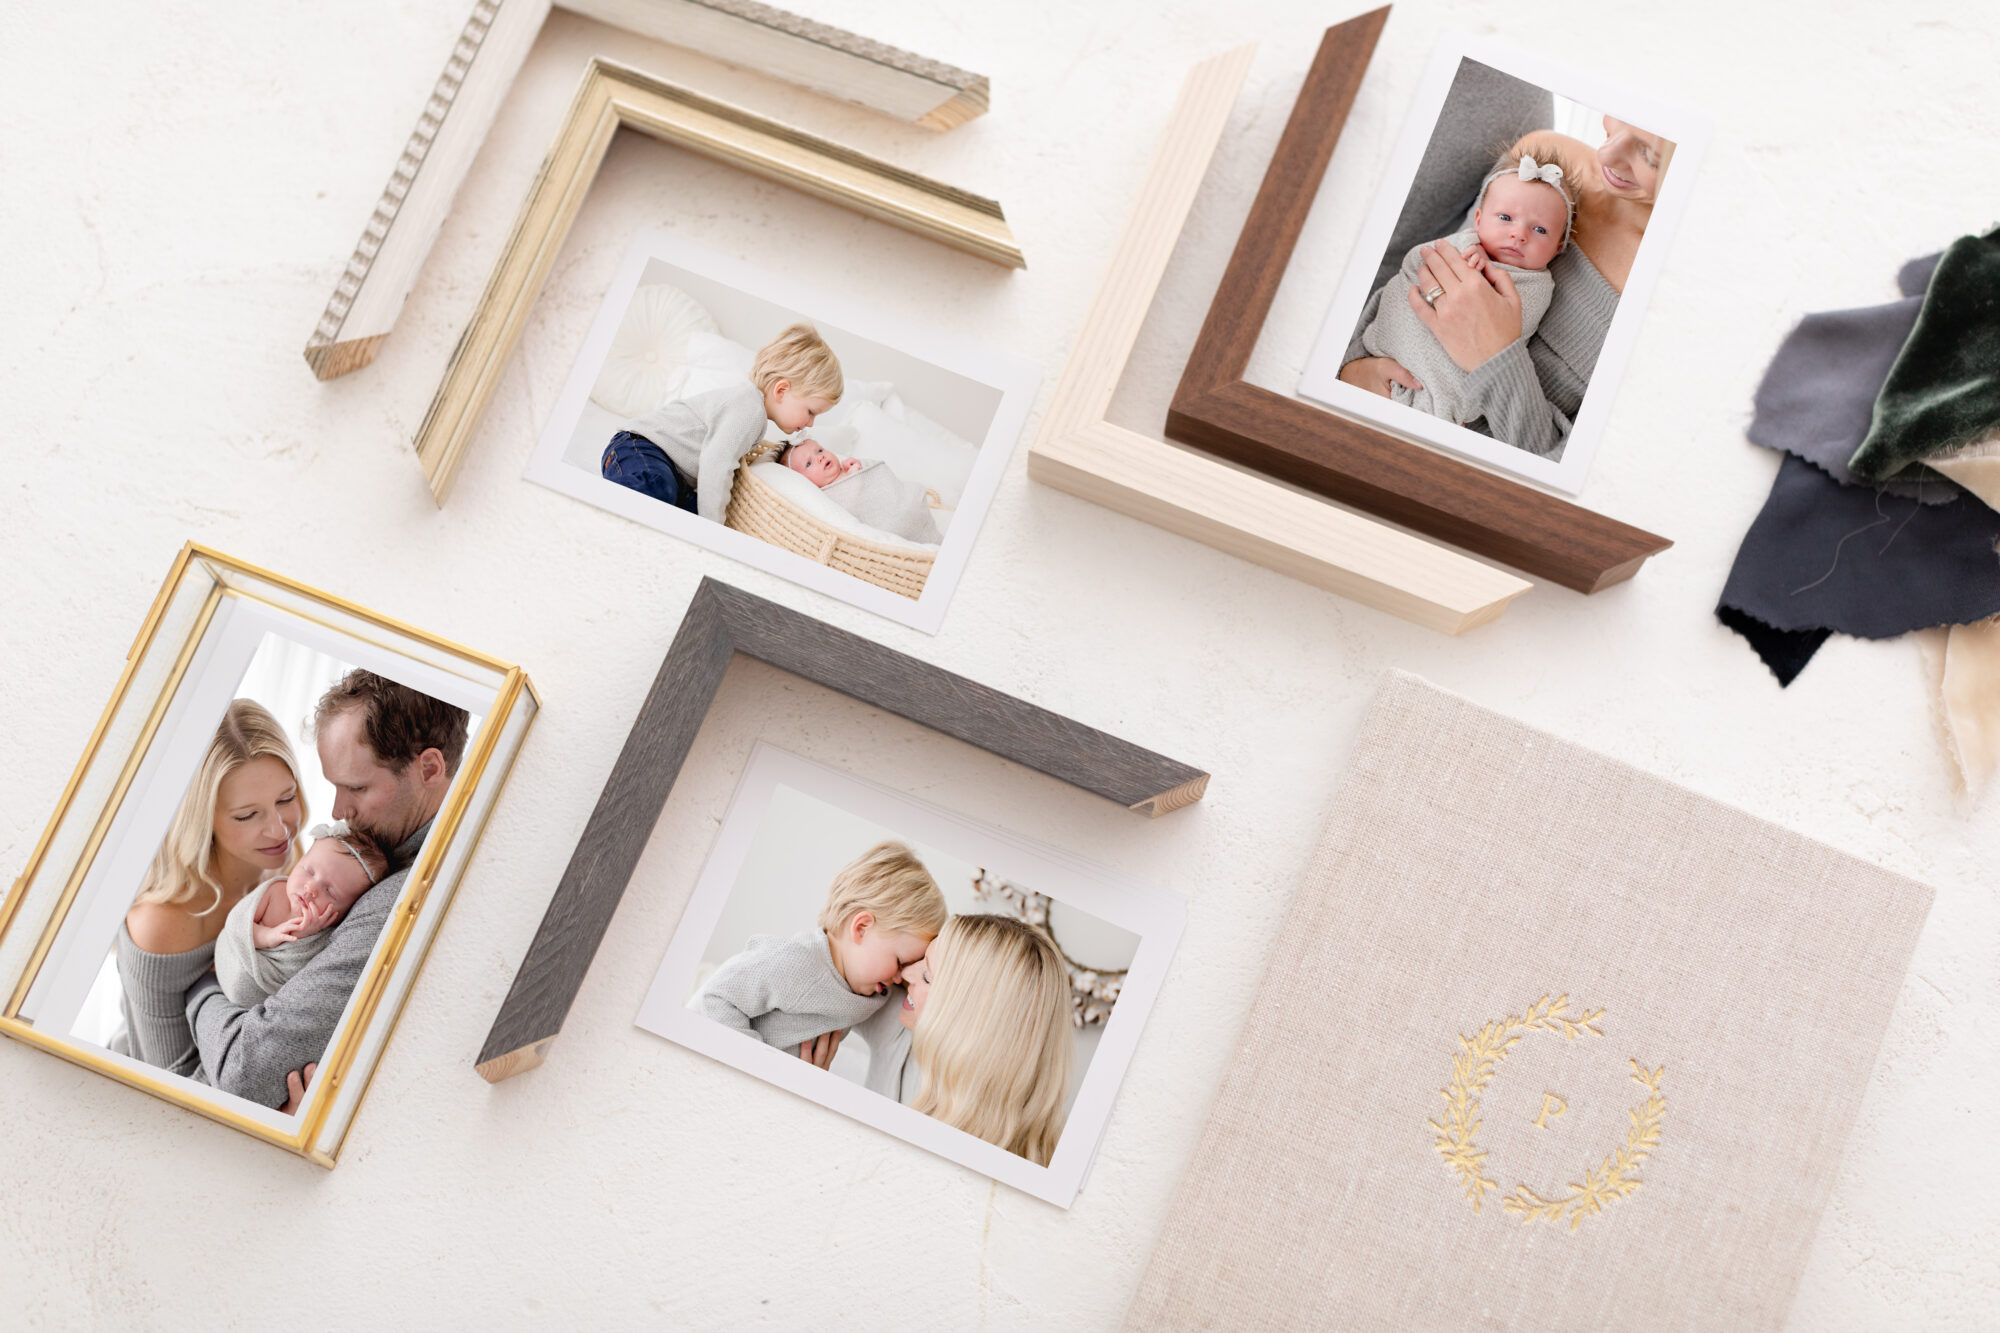 frame samples and printed photographs alongside heirloom albums and cover samples show professional photography products available